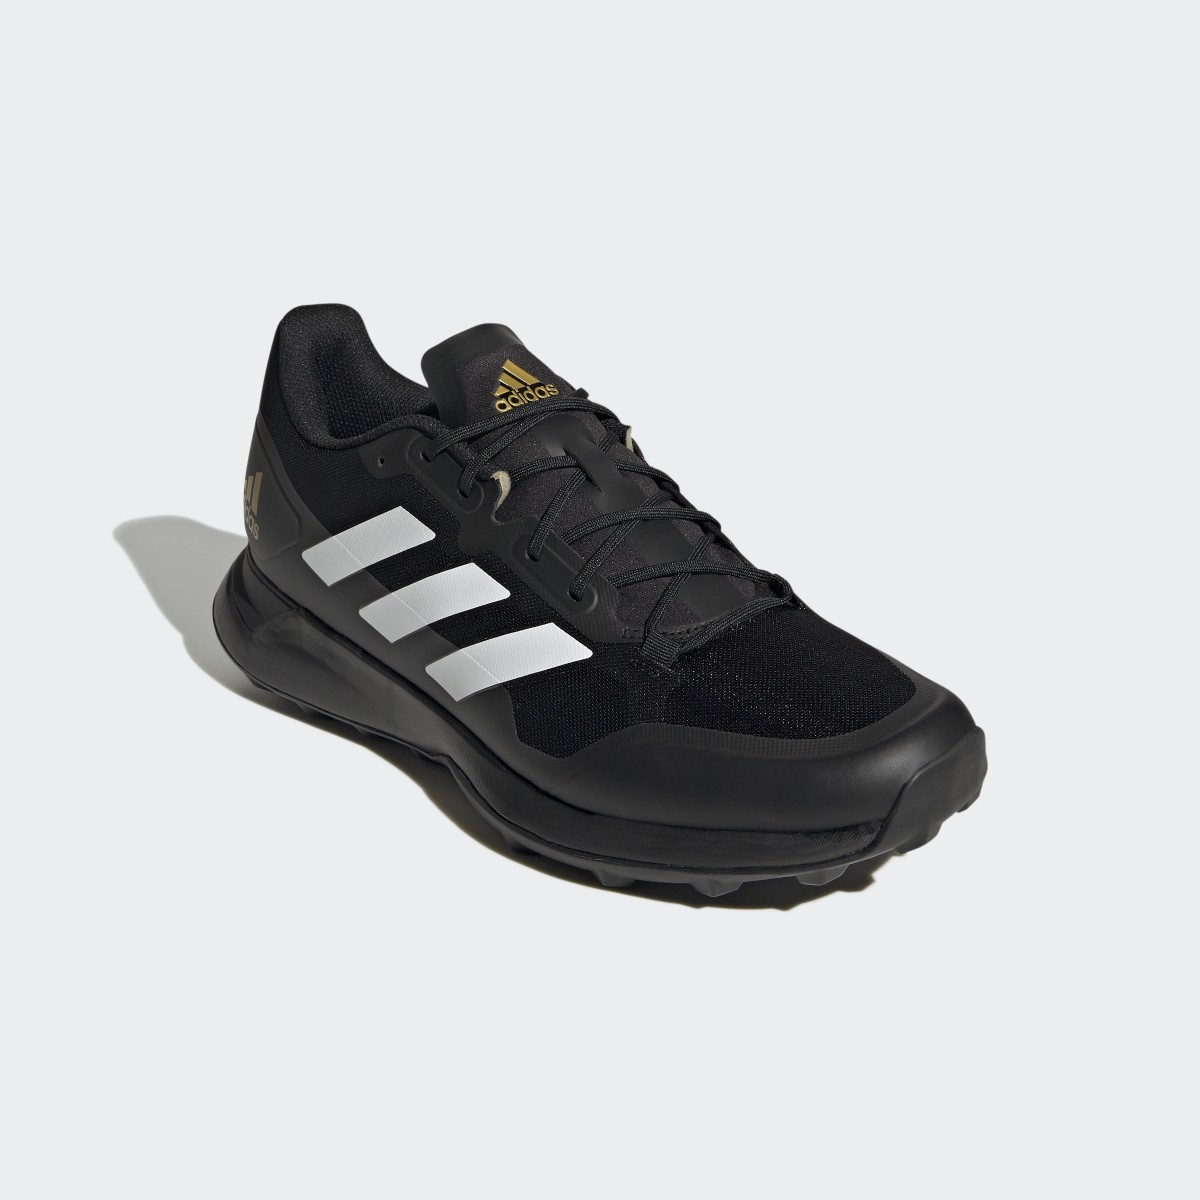 Adidas Zone Dox 2.2 S Boots. 5